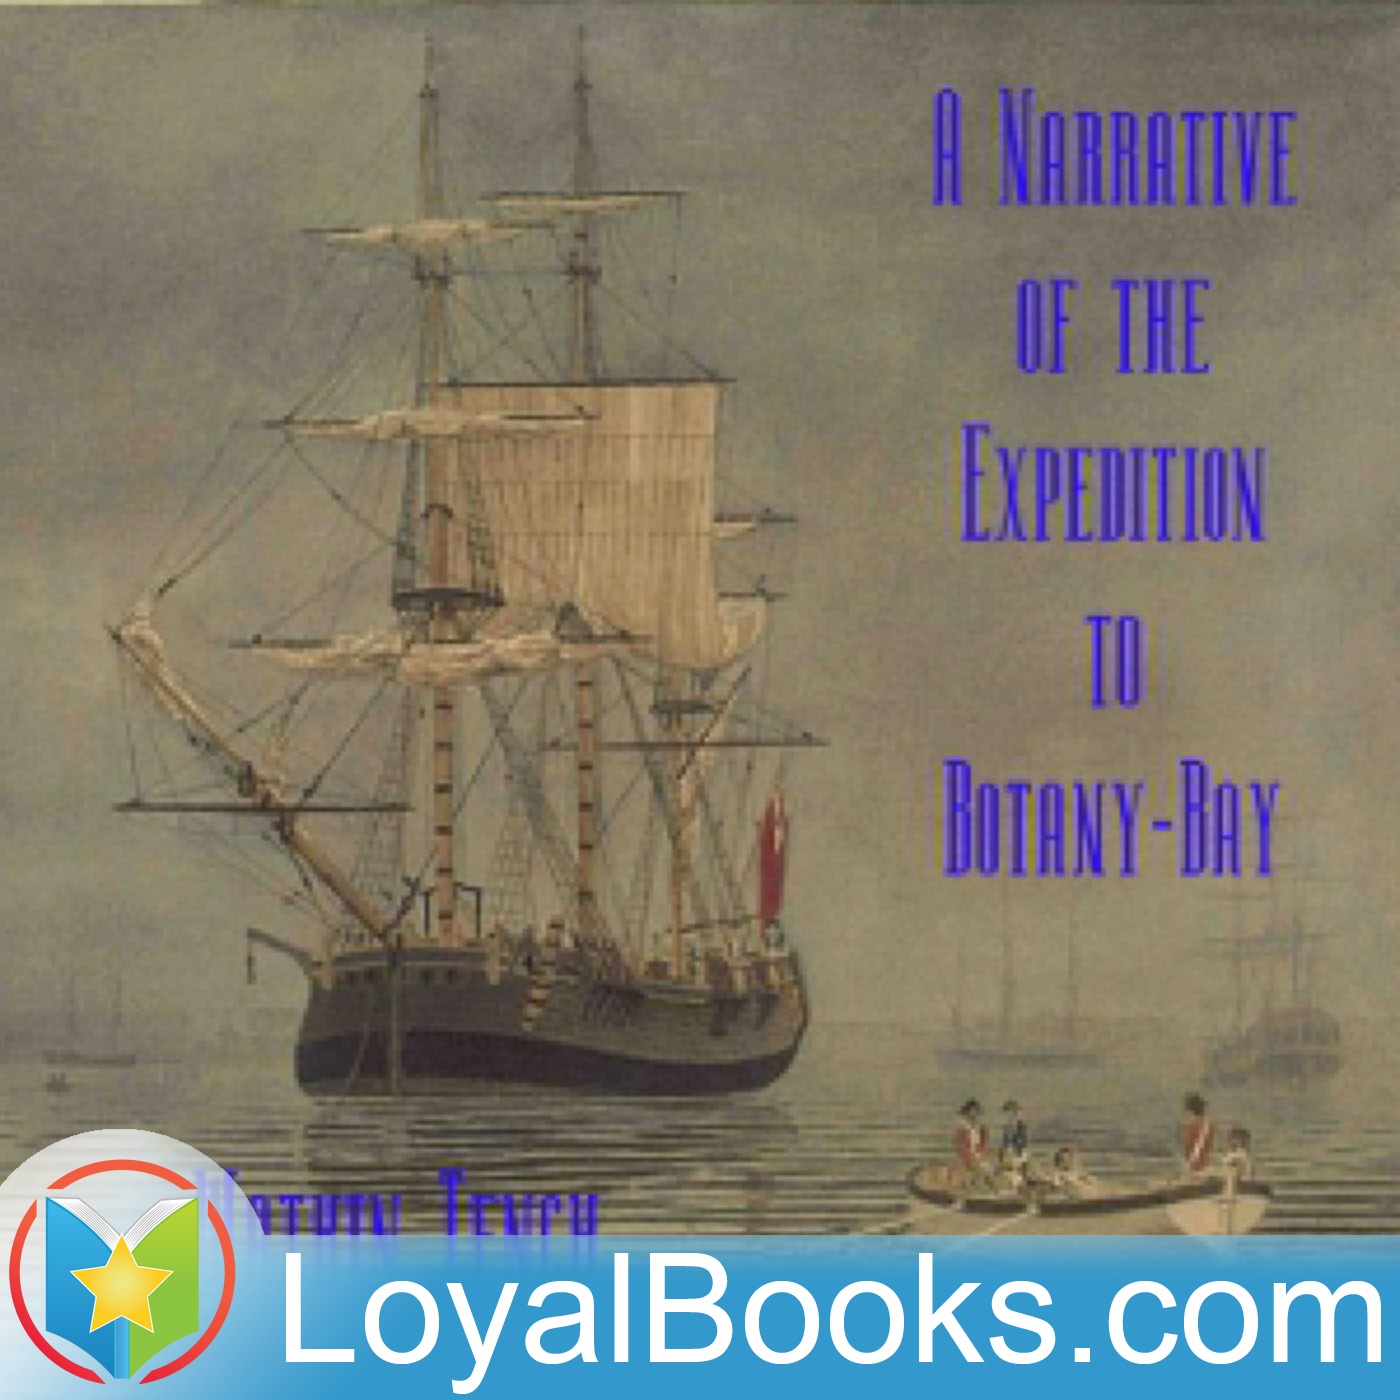 A Narrative of the Expedition to Botany-Bay by Watkin Tench